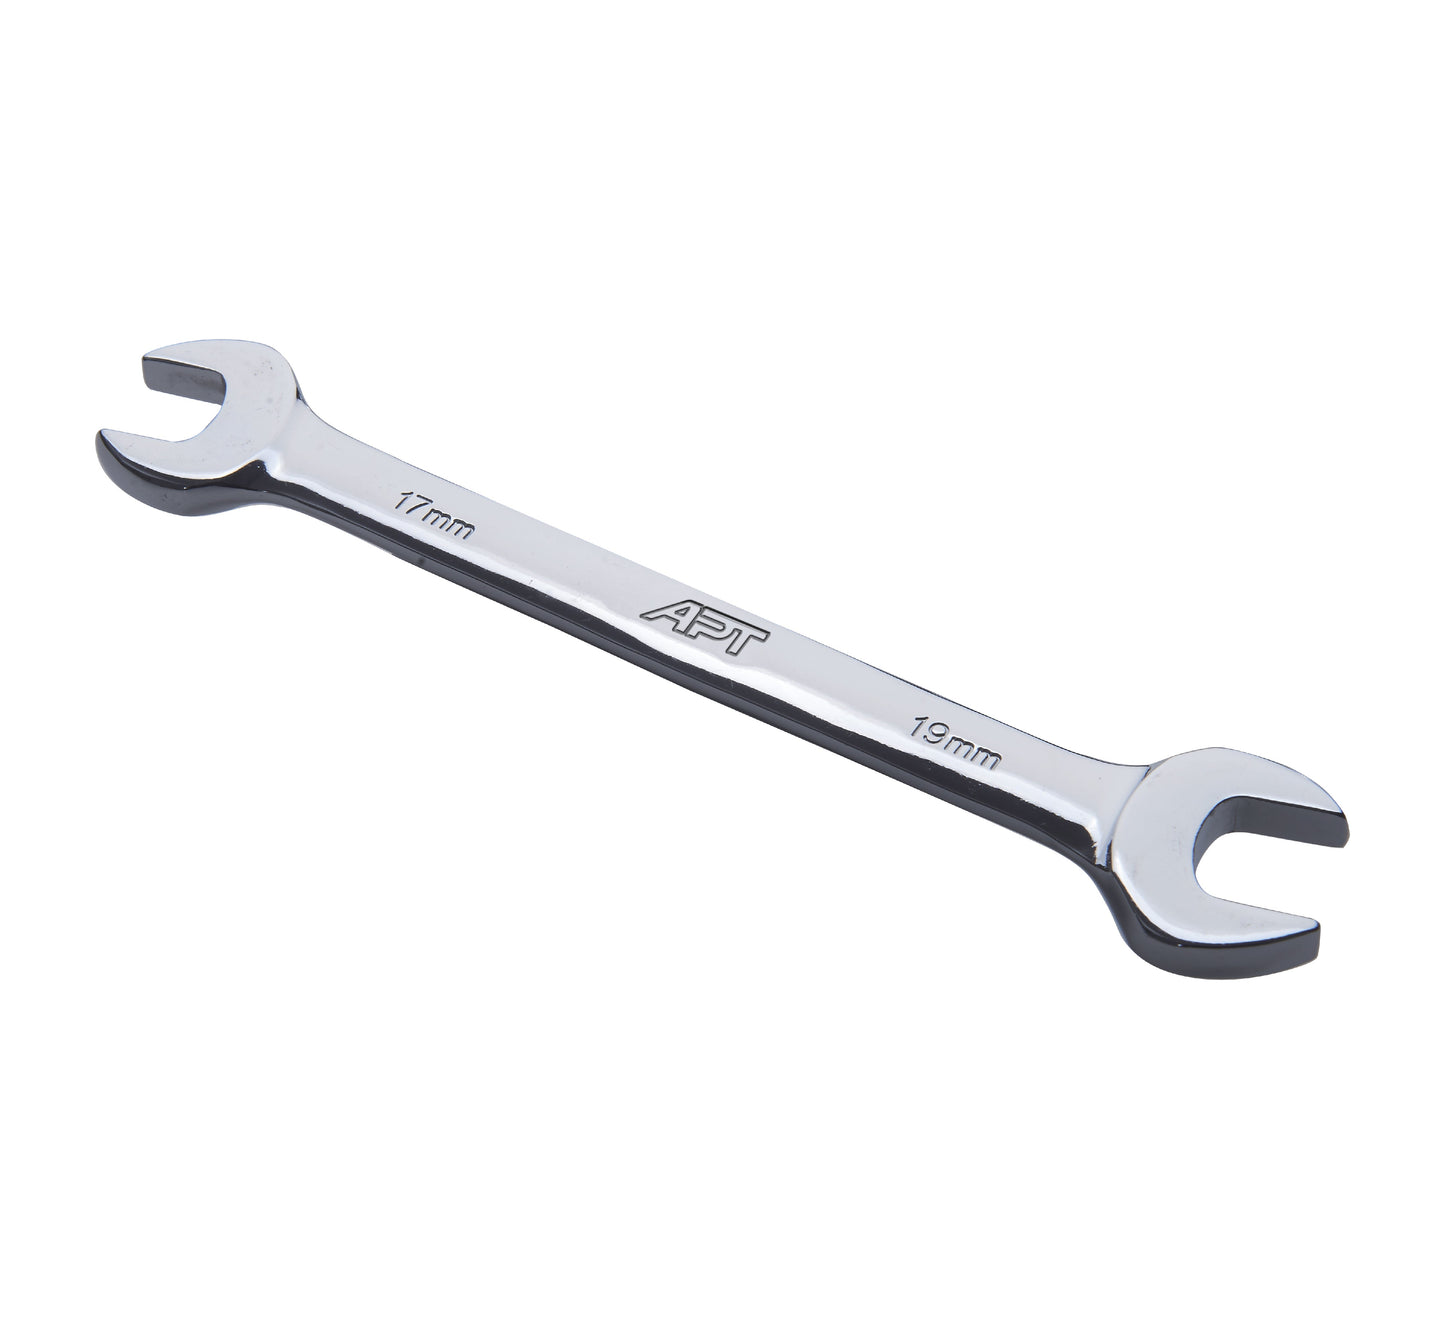 APT DOUBLE OPEN END WRENCH BRIGHT SATIN FINISH PP CARD HOLDER CR-V 32X36MM-DW251401-32X36